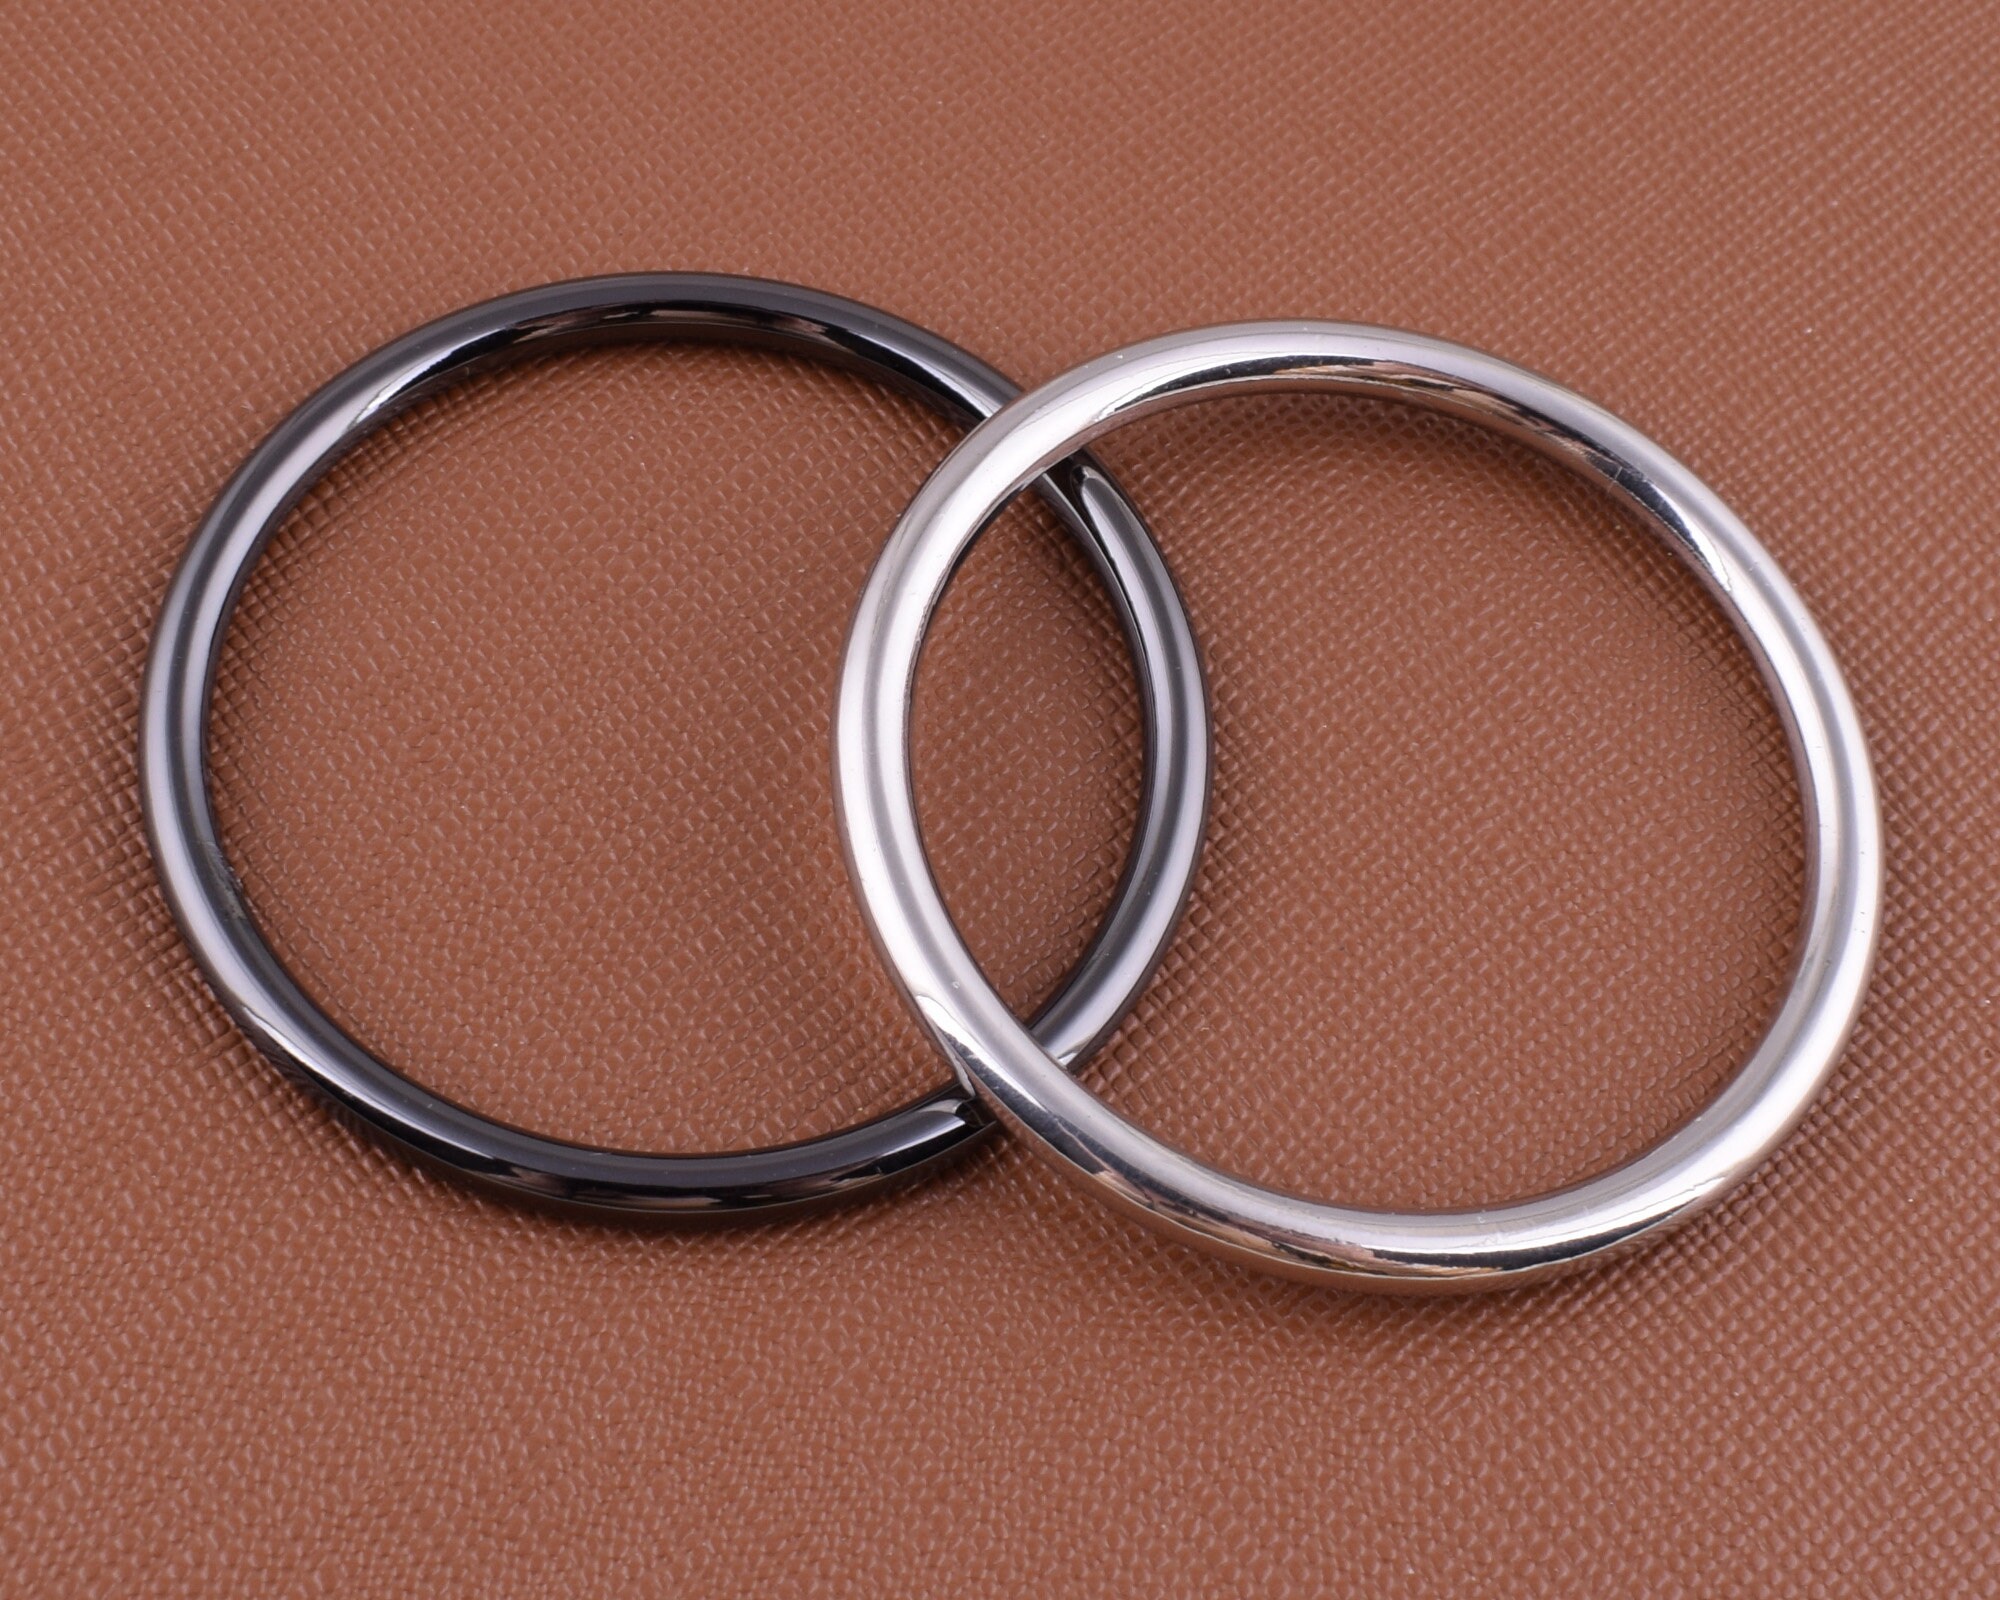 Metal O Rings, 12pcs 38mm(1.5) ID 4.6mm Thick Non-Welded O-Rings, Black